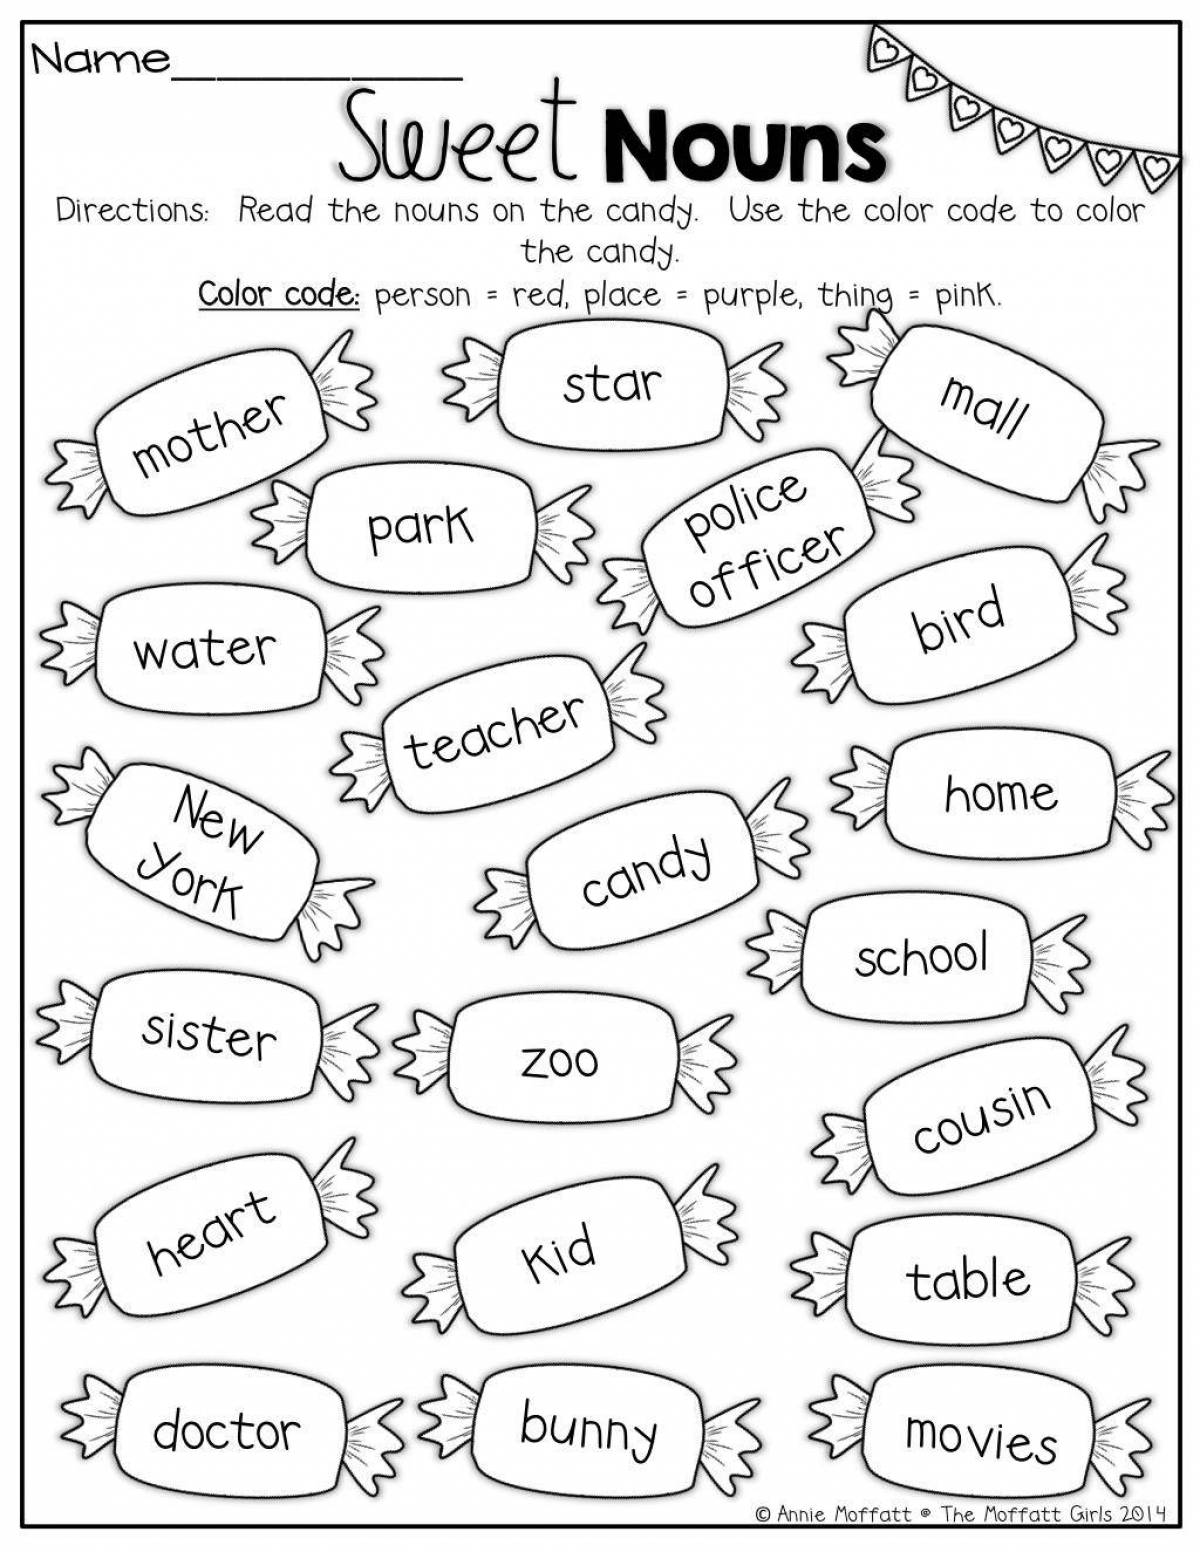 A fascinating English coloring book for 2nd grade